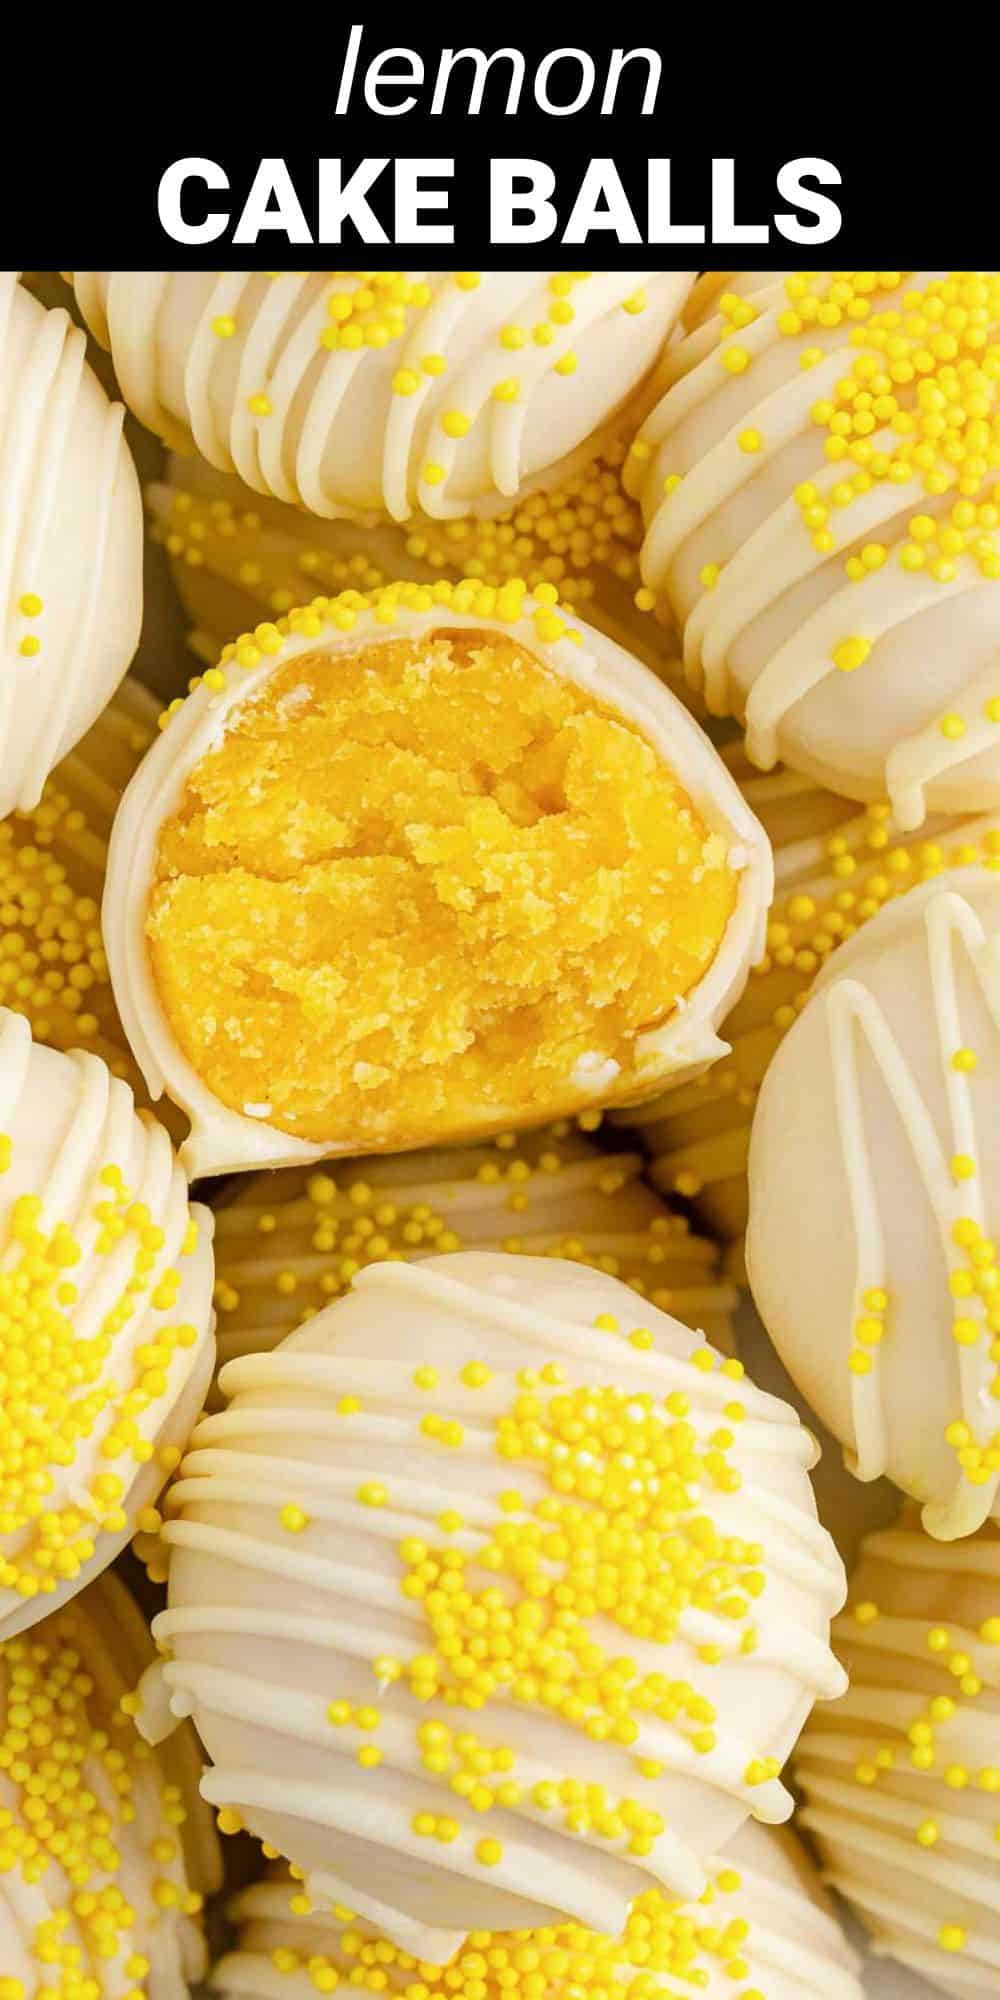 These lemon cake balls are a bite-sized and delicious treat that will be your new favorite party recipe. Bursting with lemon flavor, these truffle-like mini desserts will be a huge hit at your spring and summer events.